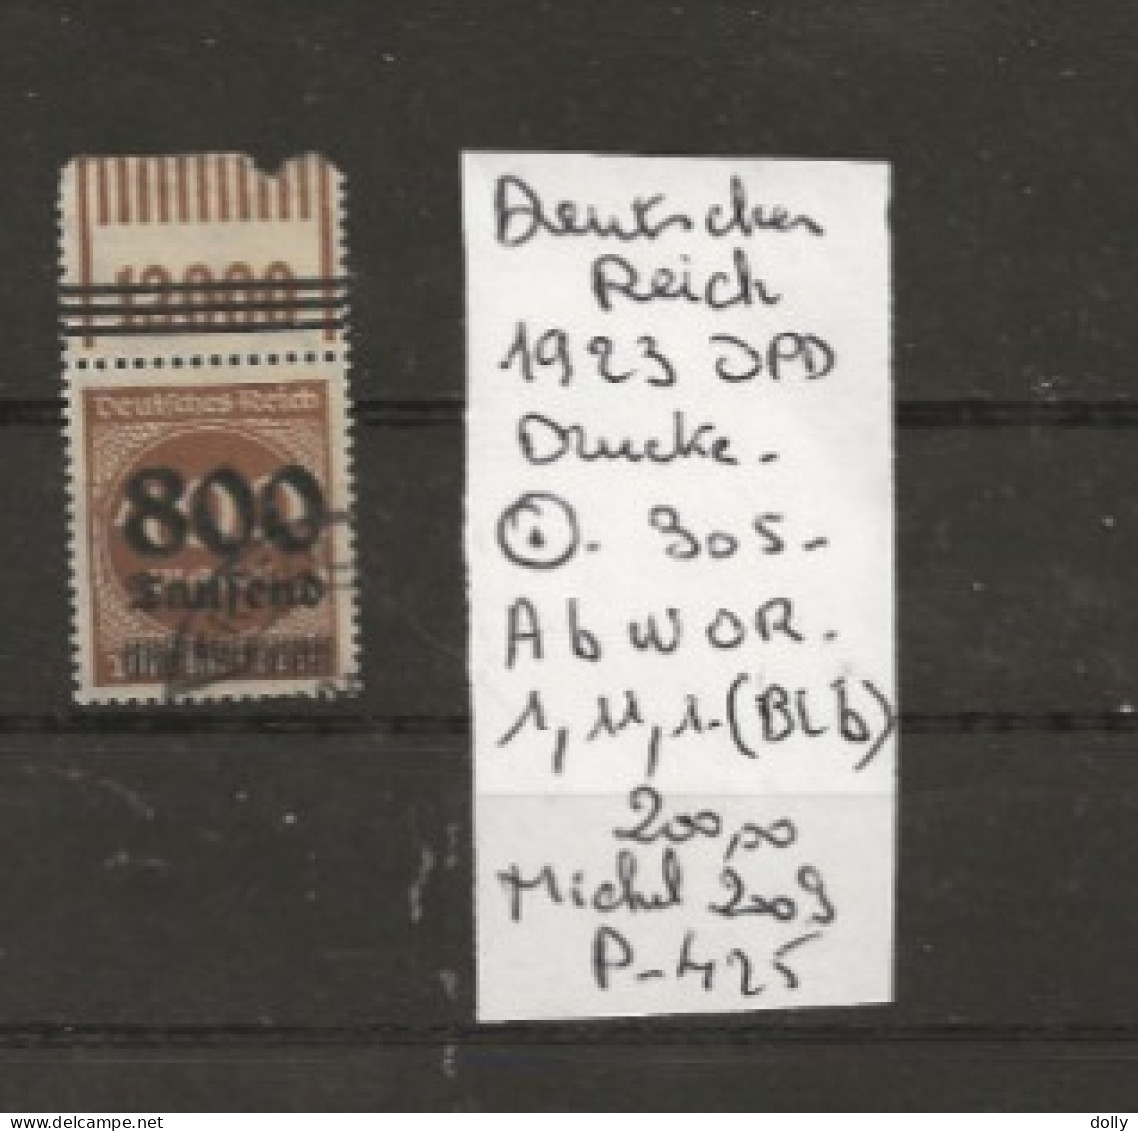 TIMBRE D ALLEMAGNE DEUTSCHES REICH 1923 Nr 305 OBLITERE OPD  A B W OR 1,11,1 COTE 200.00 € - 1922-1923 Emisiones Locales